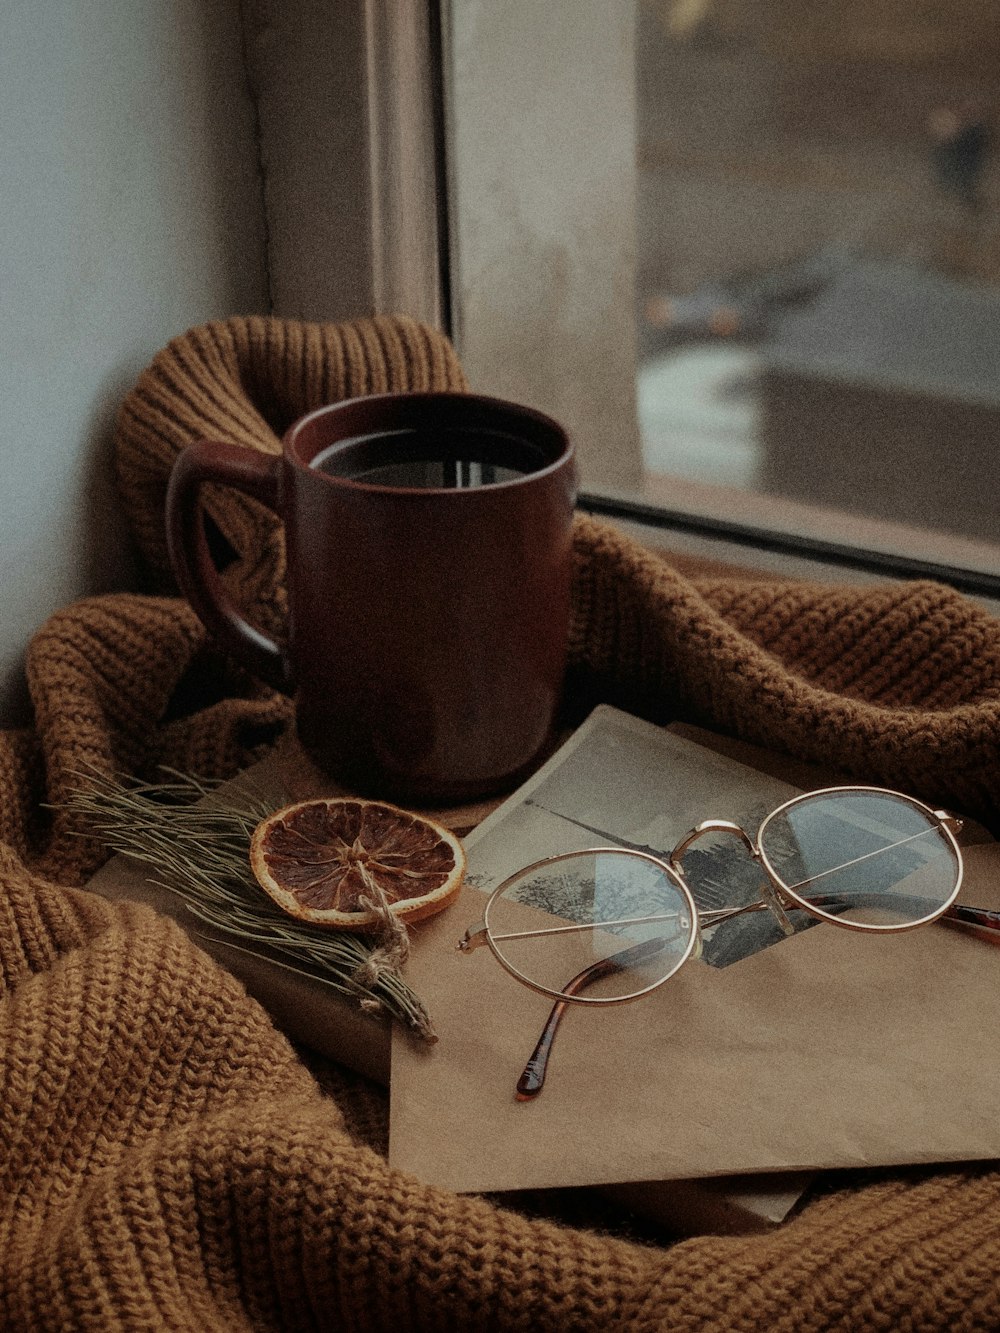 a cup of coffee and a pair of glasses on a blanket